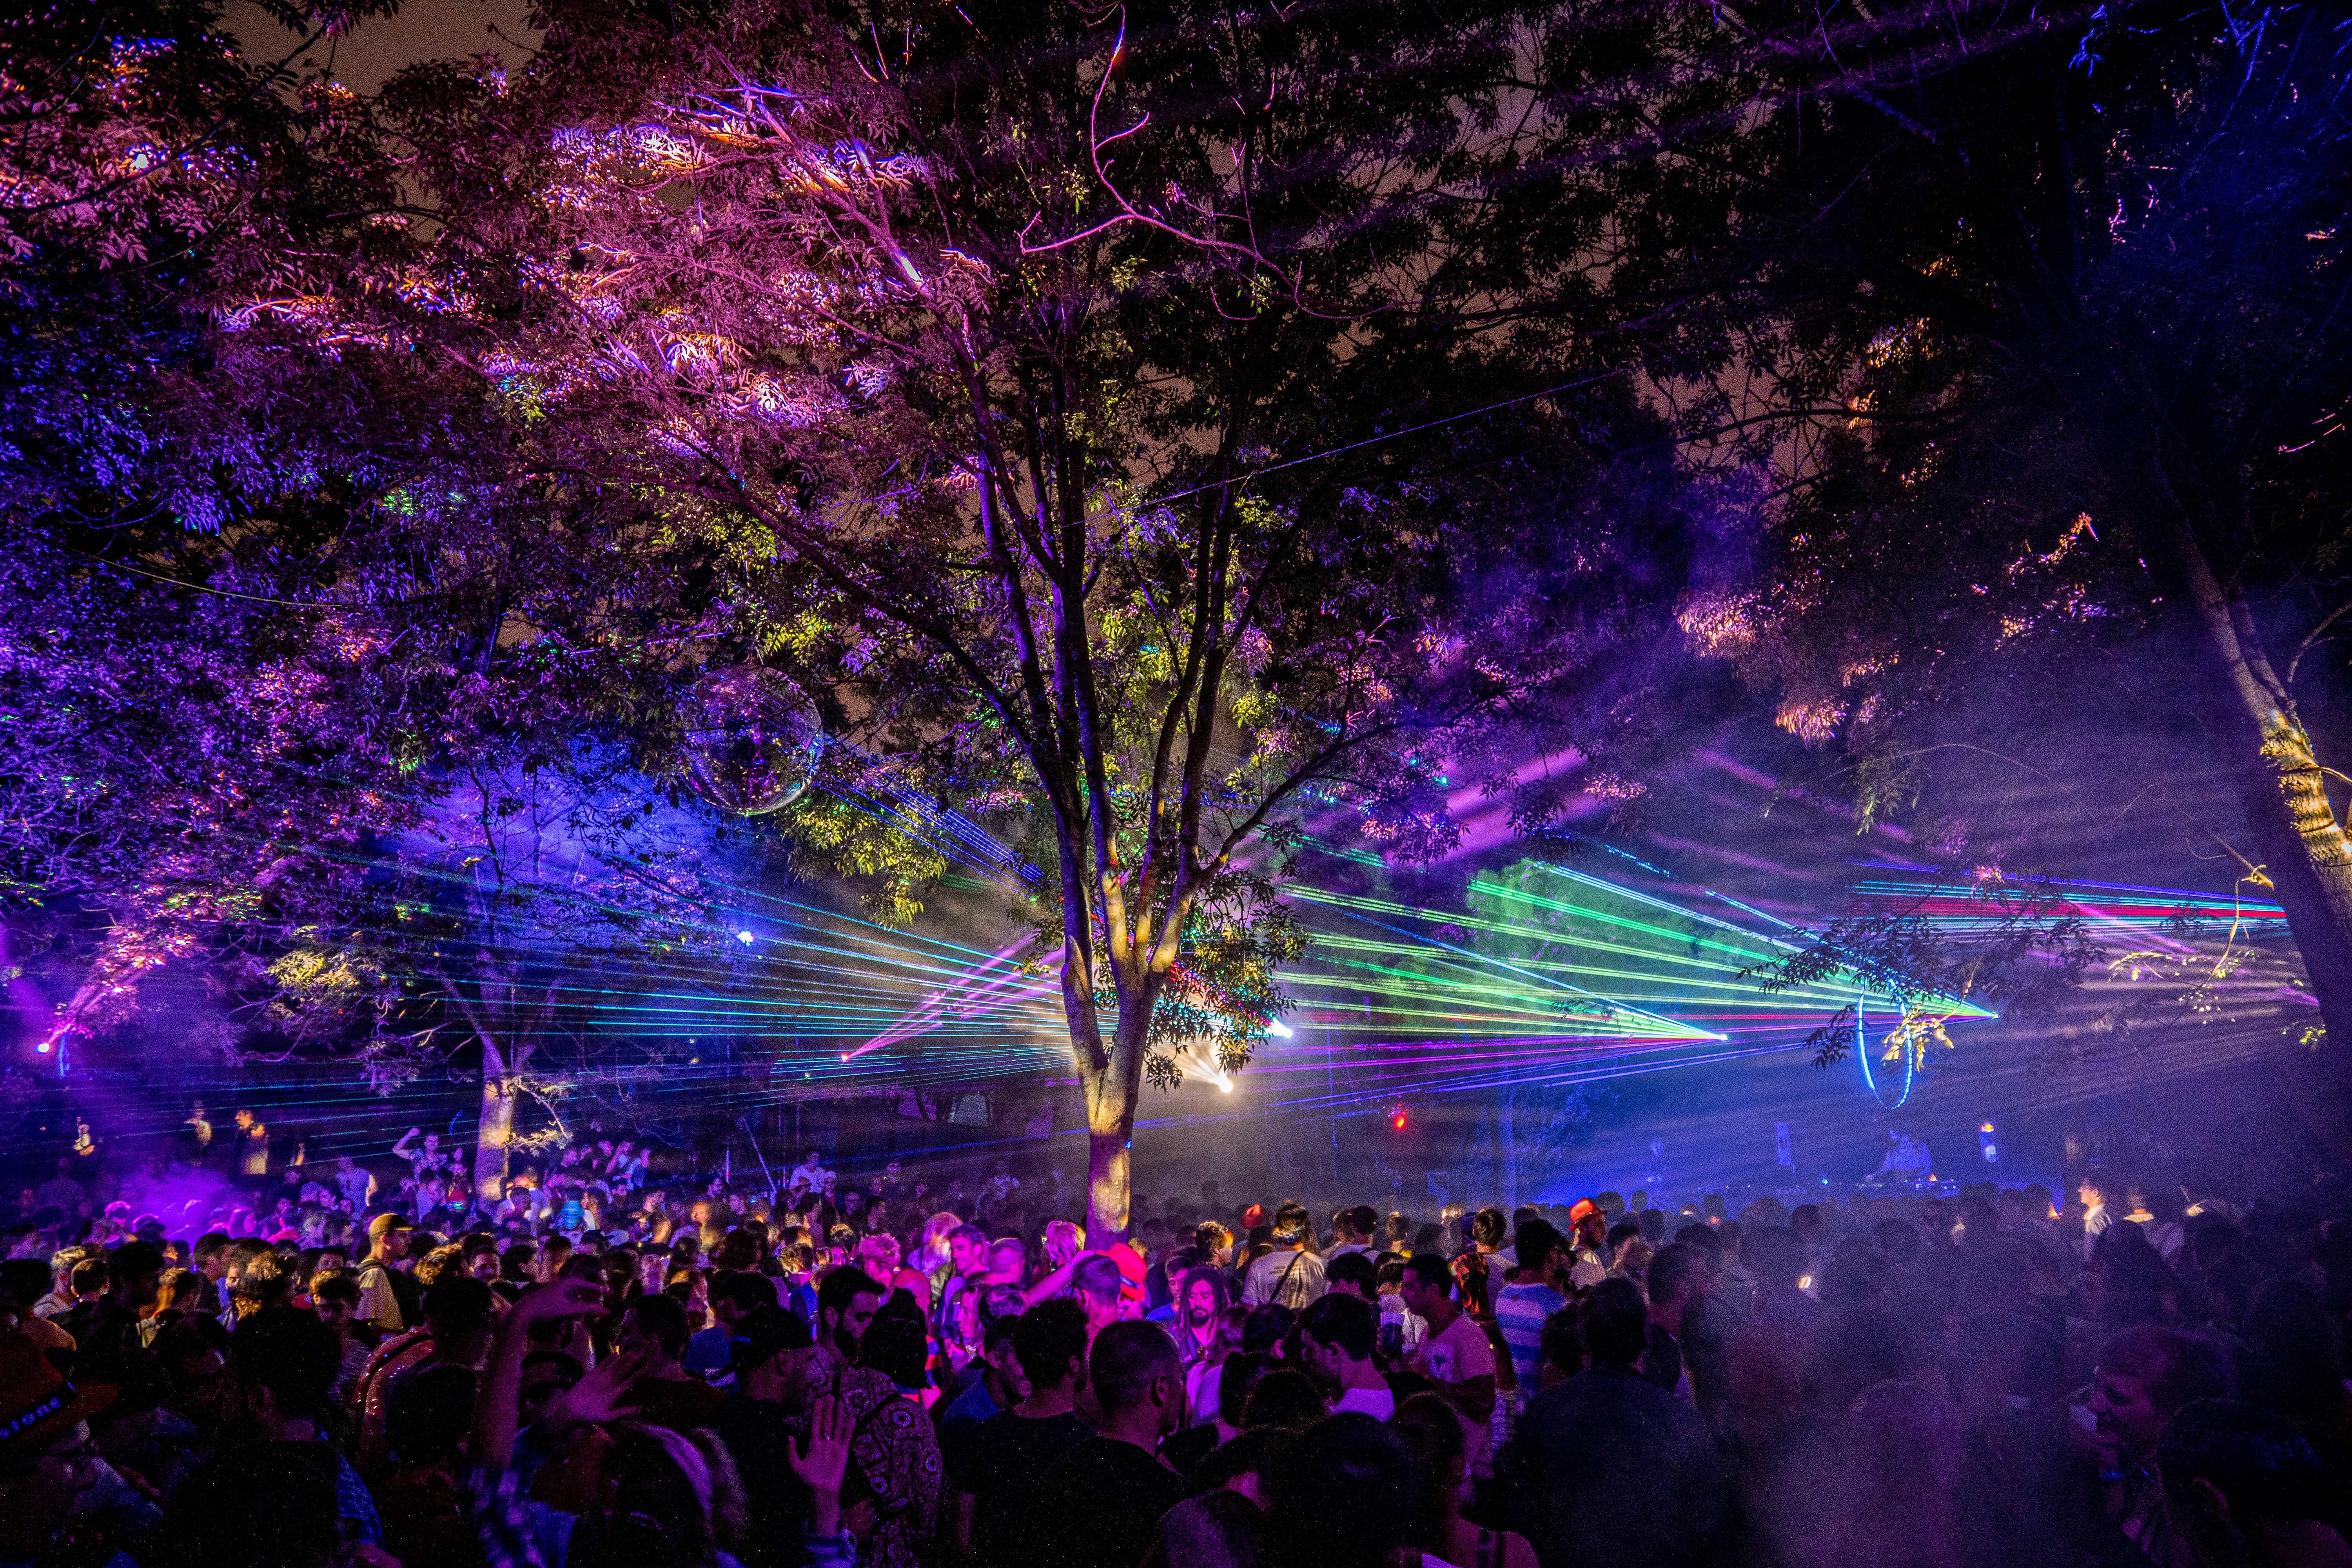 A laser light show takes place over the heads of a crowd dancing to a night-time electronic music set at Bilbao BKK Live festival.